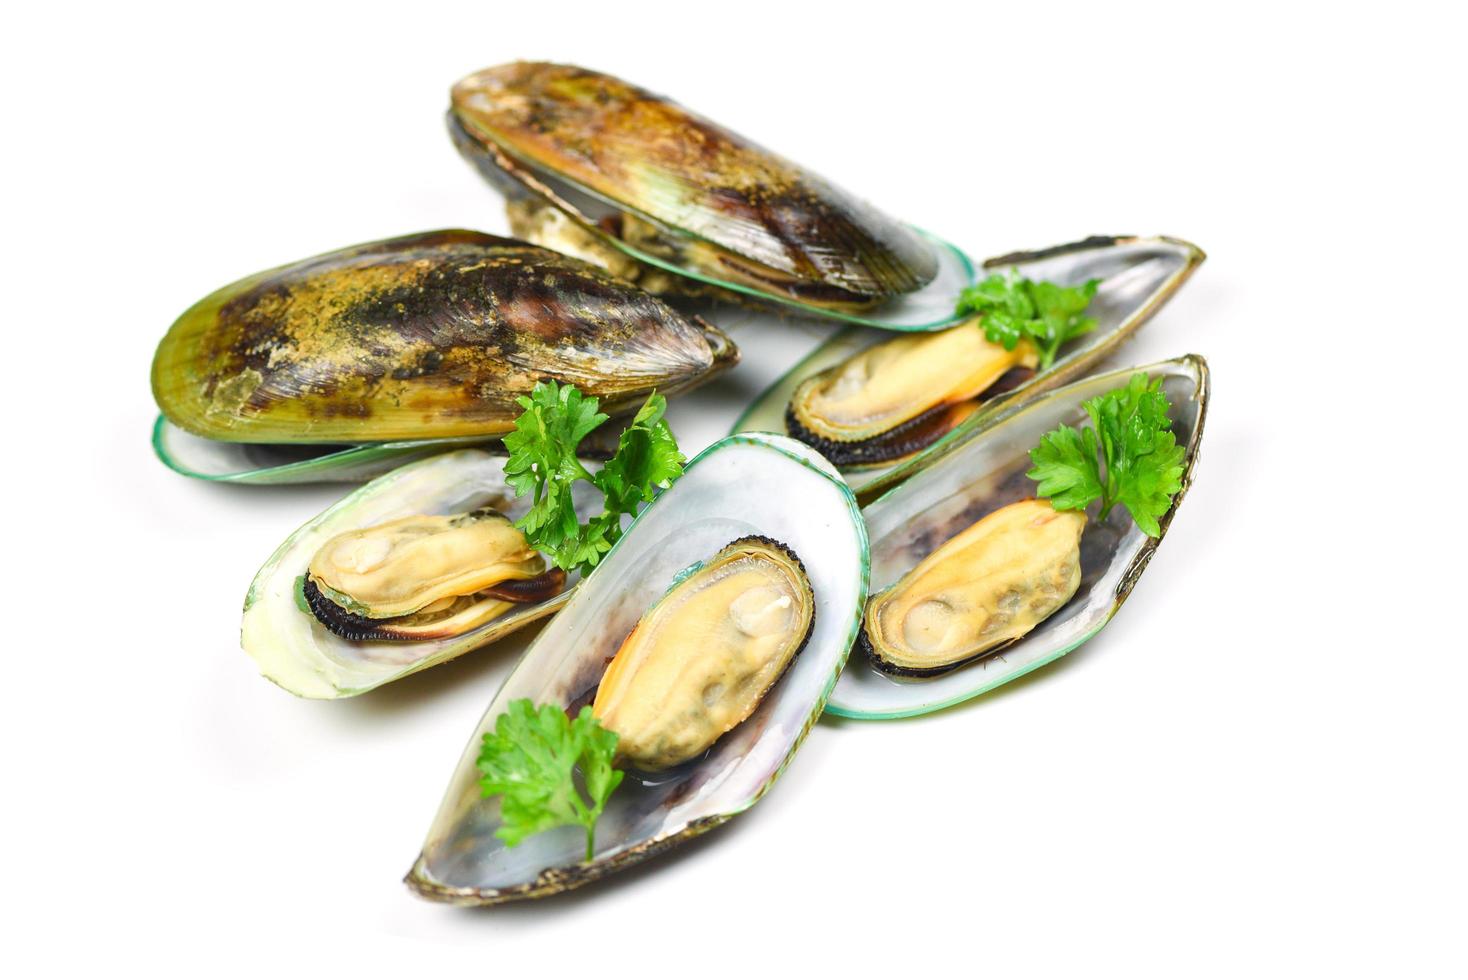 Mussels isolated on white background - Green mussel shell with parsley photo